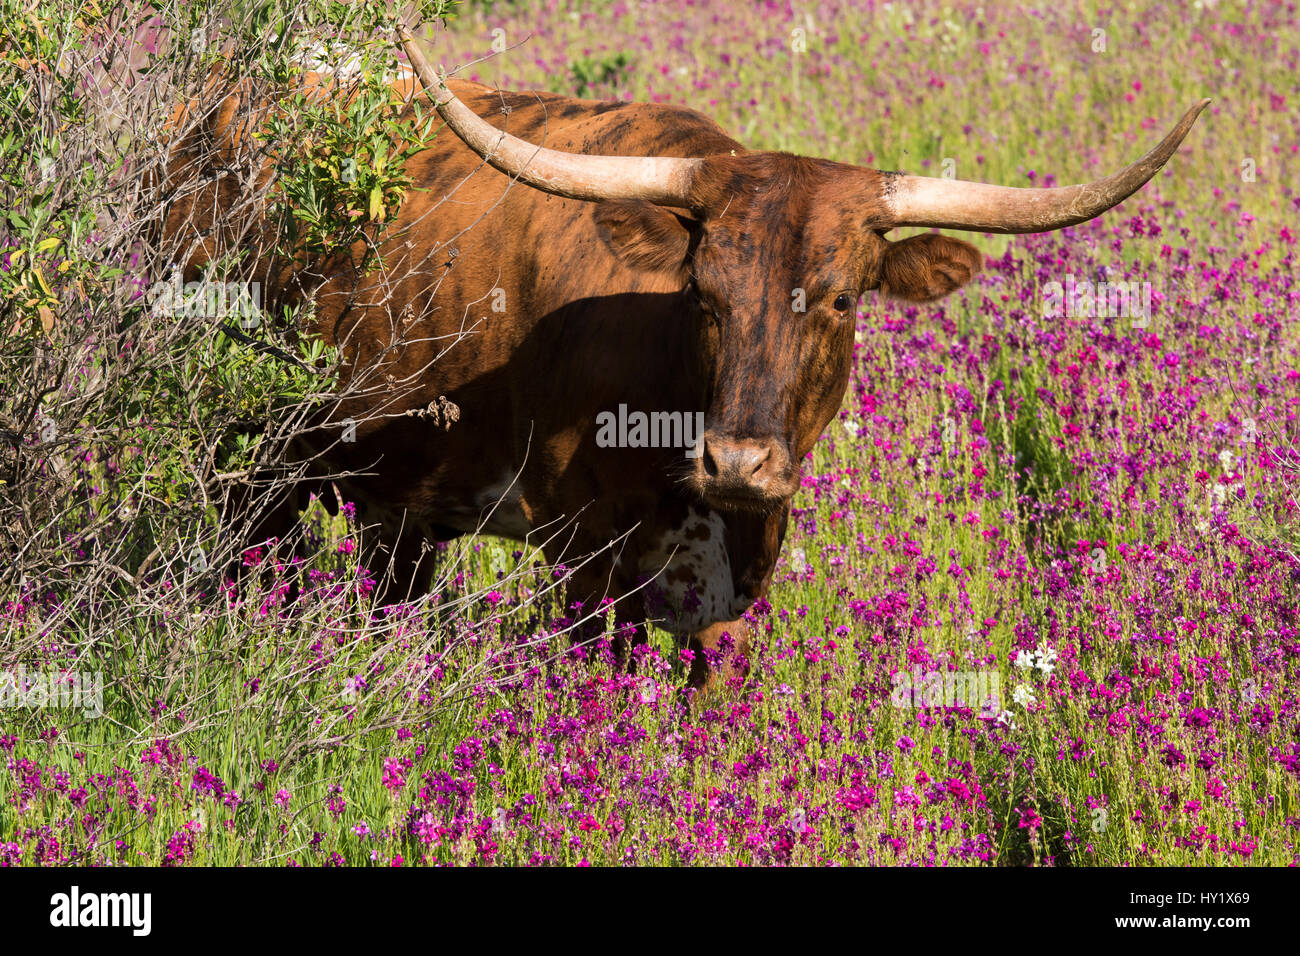 Texas longhorn cow emerging from thicket into wildflowers in hill country ranch land. Santa Barbara County, California, USA. Stock Photo